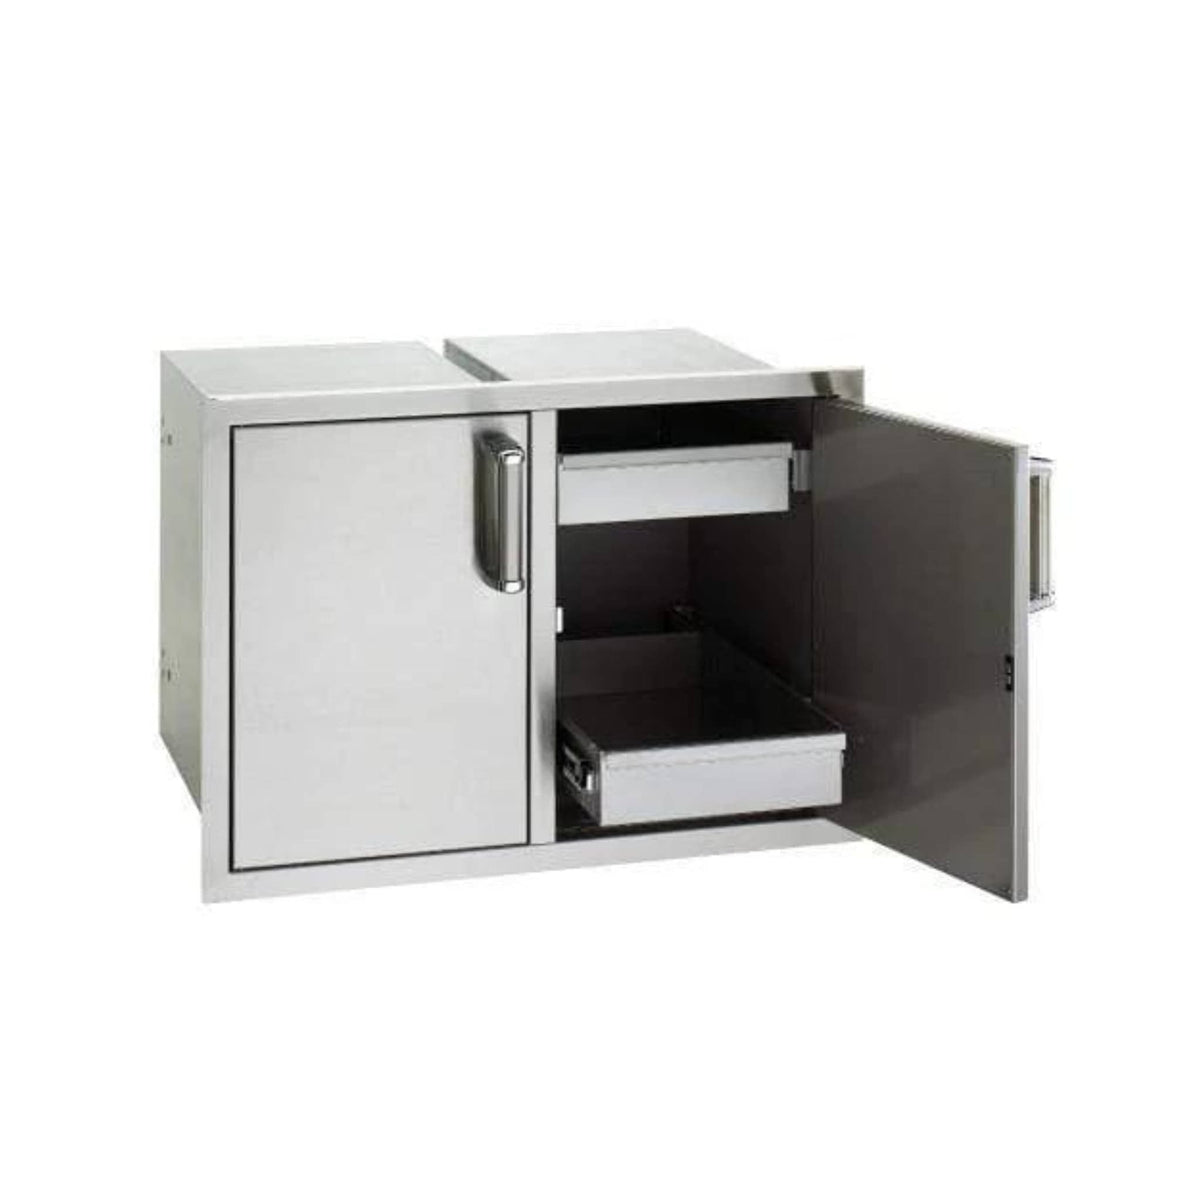 Fire Magic Double Doors With 2 Dual Drawers 53930SC-22